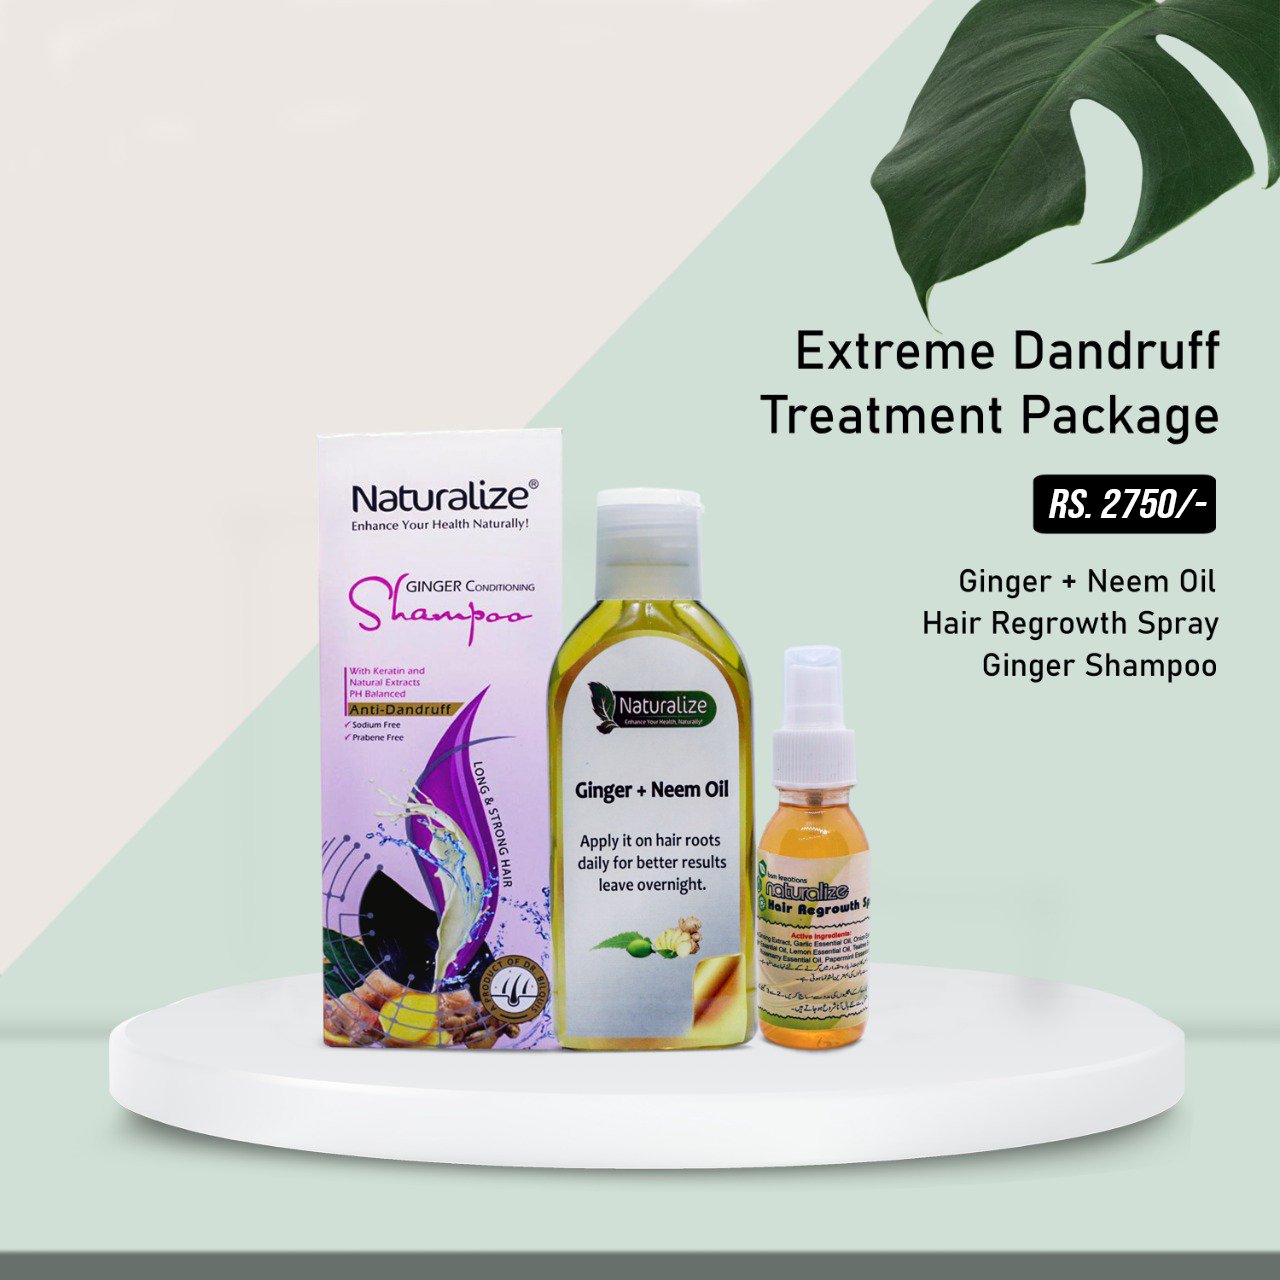 EXTREME DANDRUFF TREATMENT PACKAGE - Naturalize